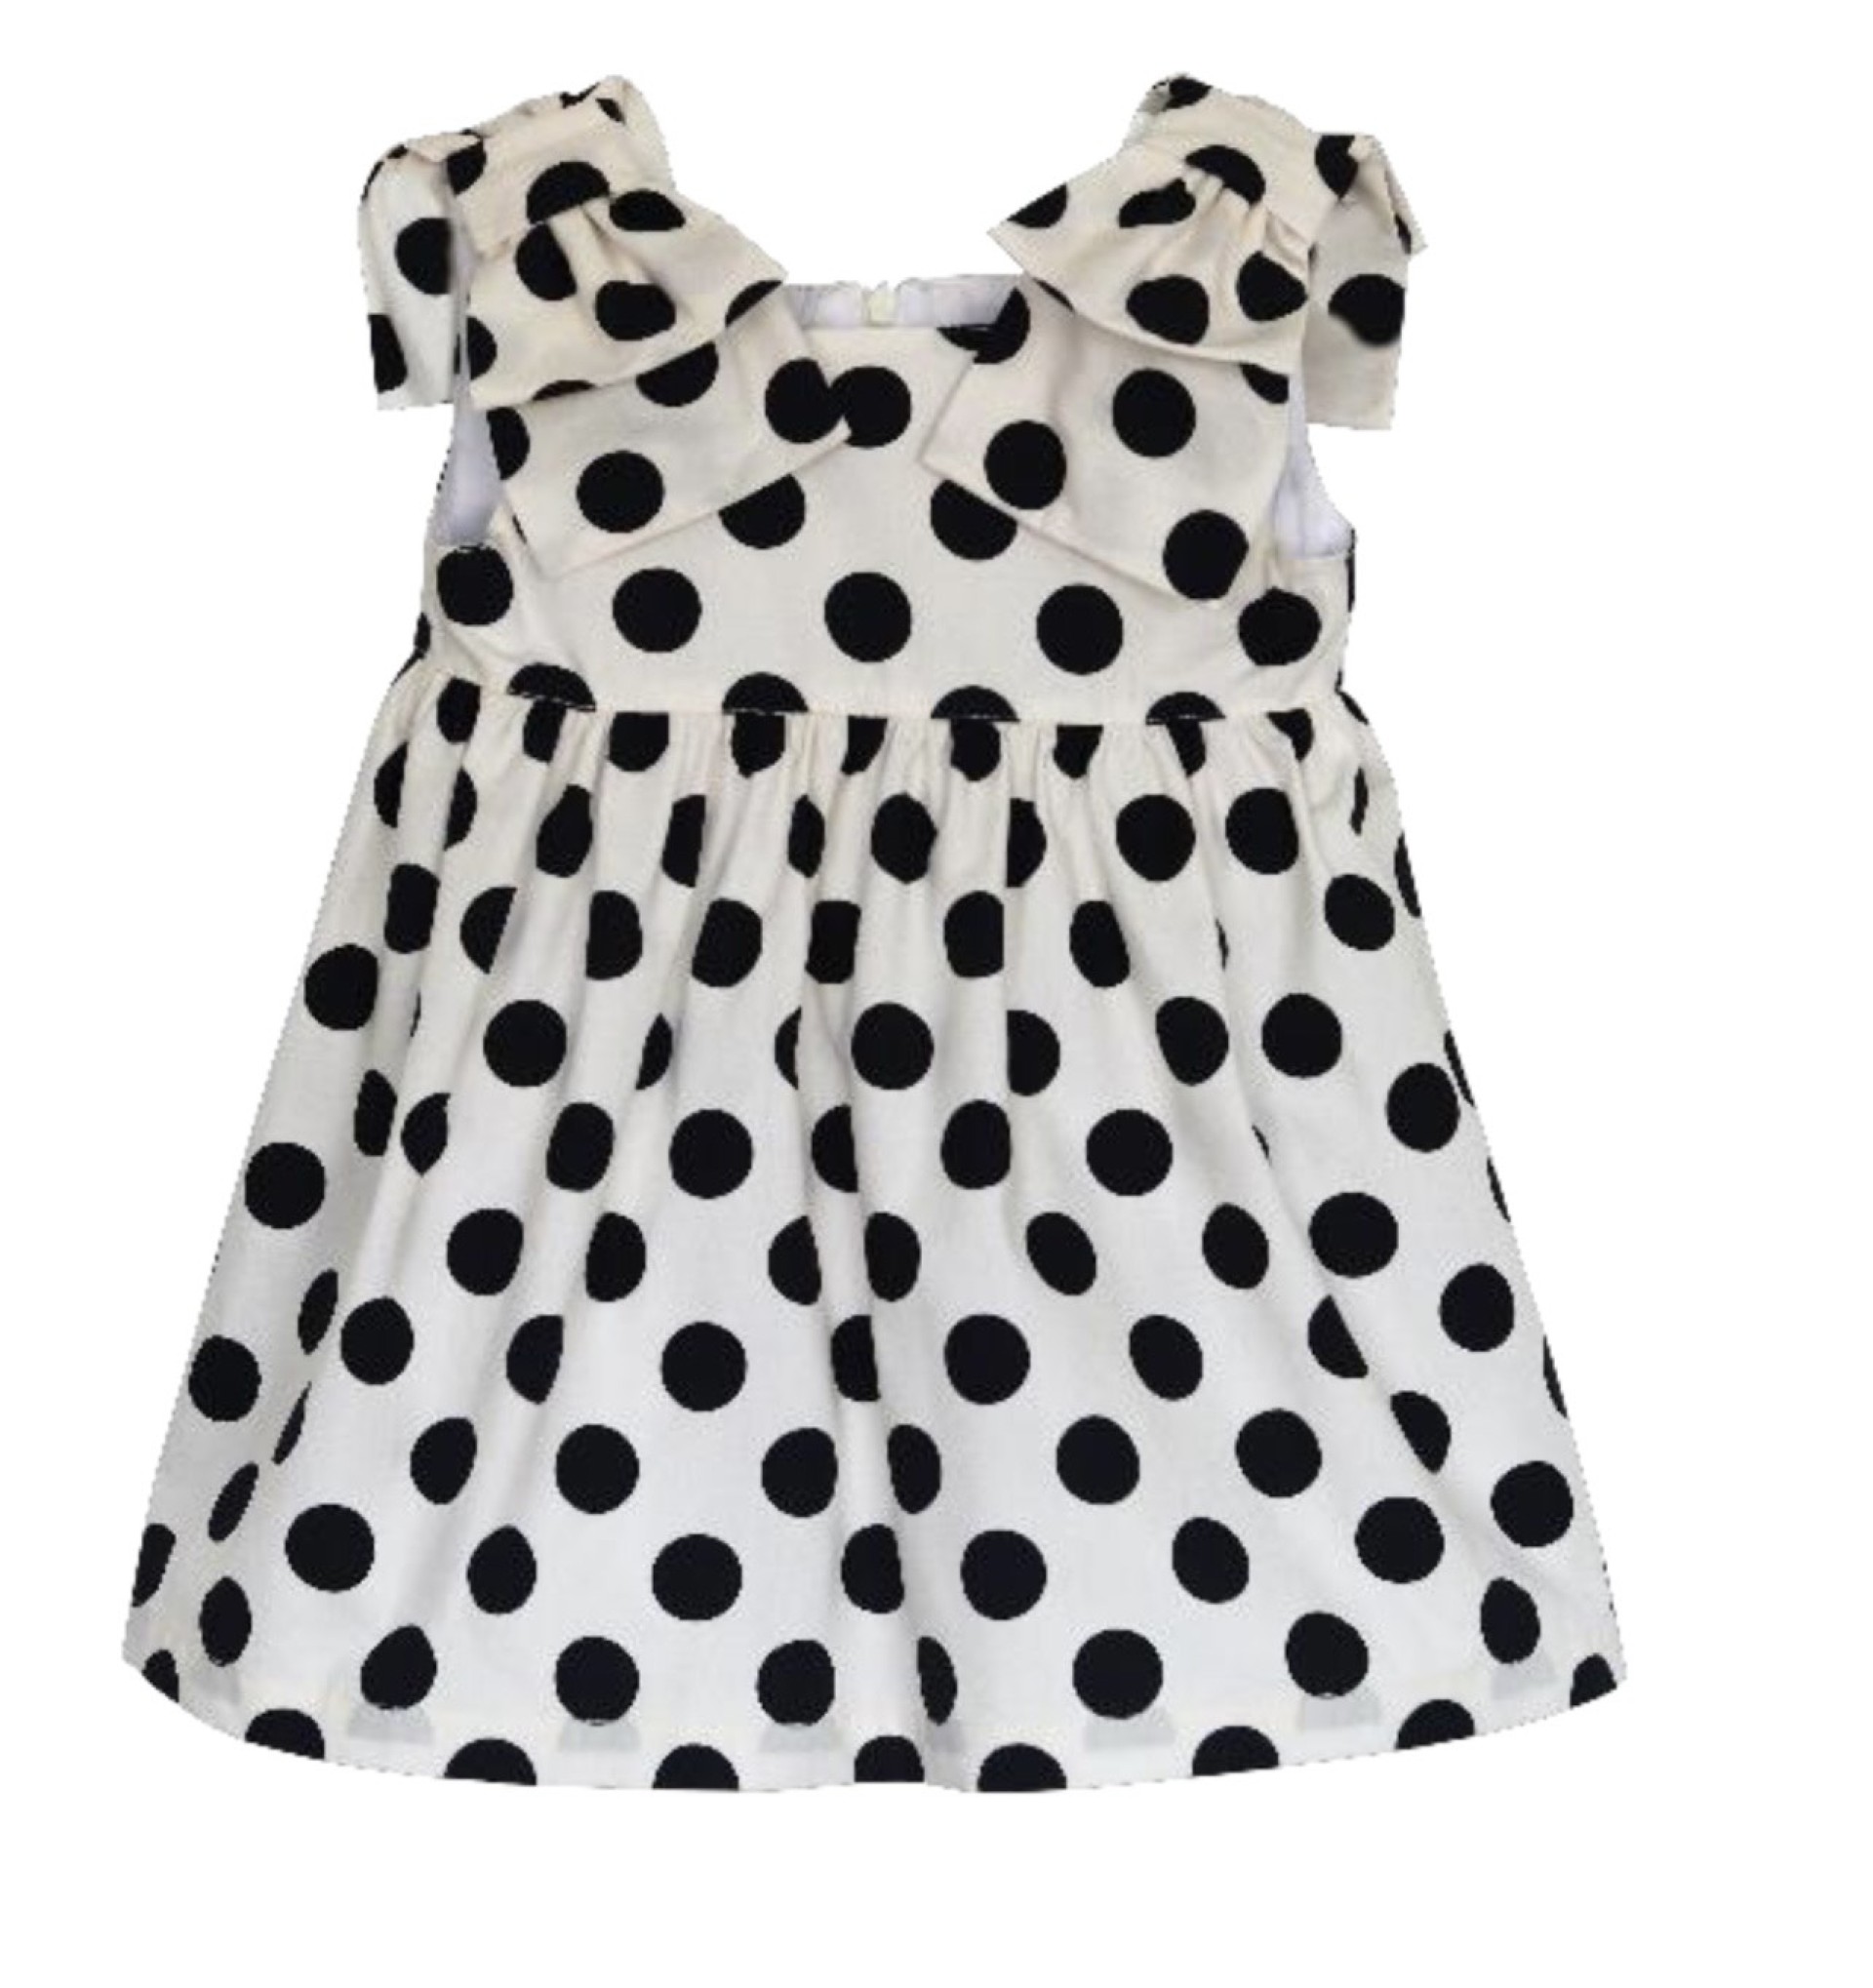 Ivory with black dots bows dress